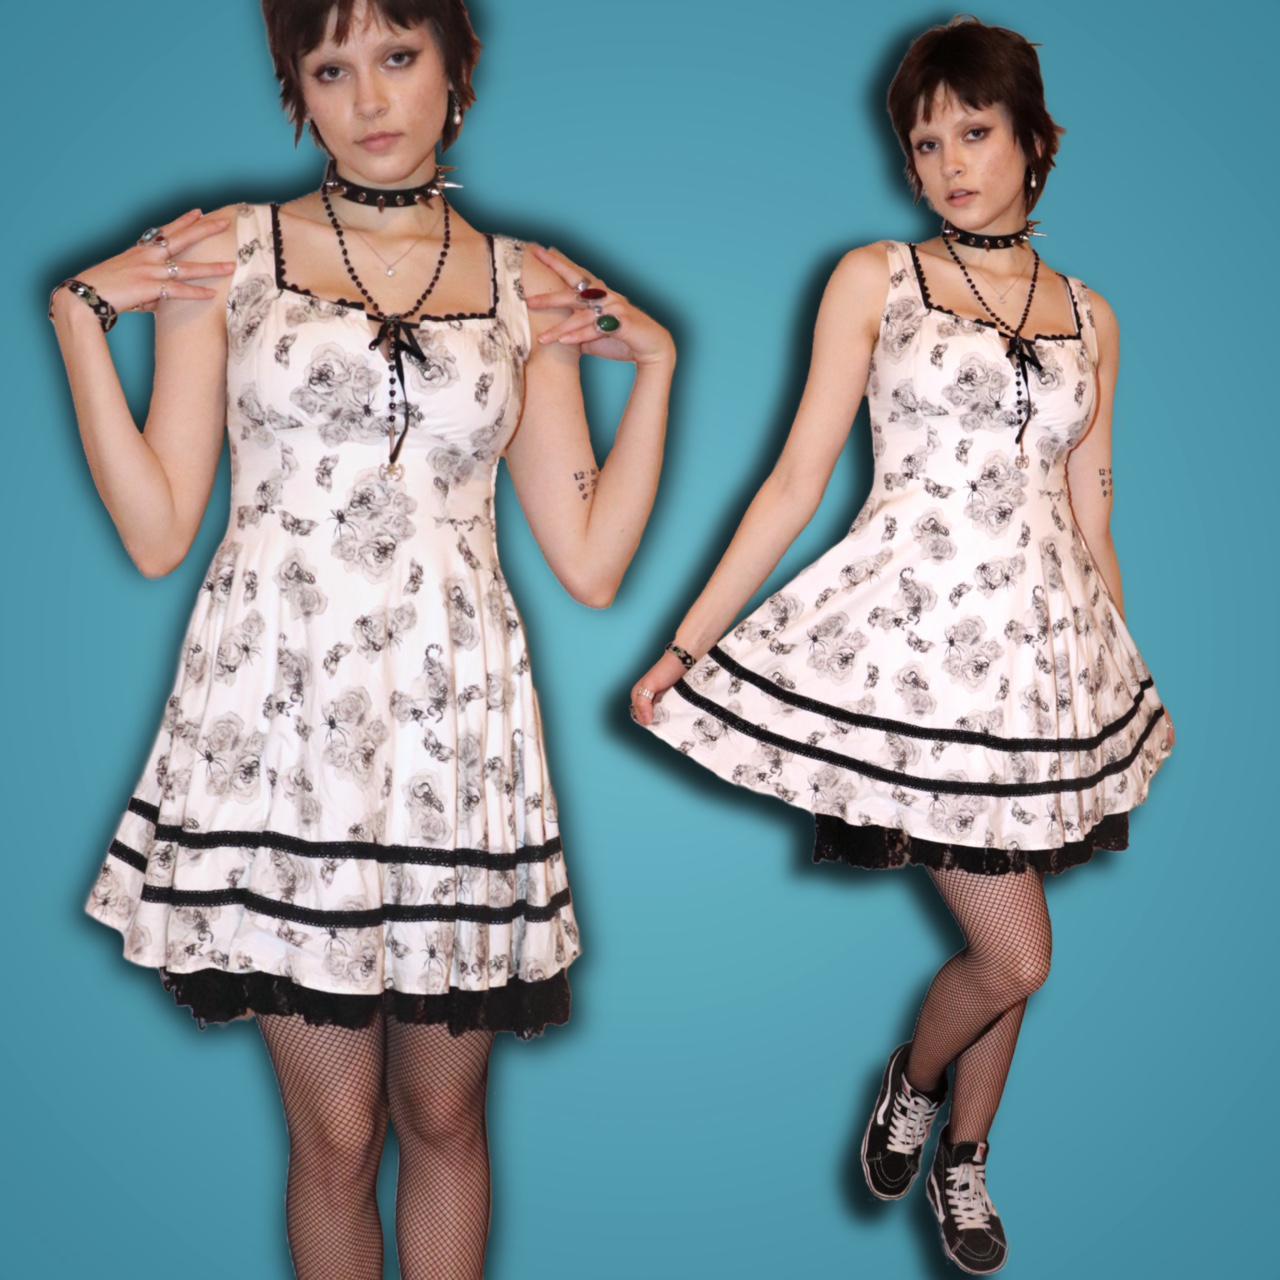 Product Image 1 - 🌹HOT TOPIC DRESS🌹
❤︎ you'll look